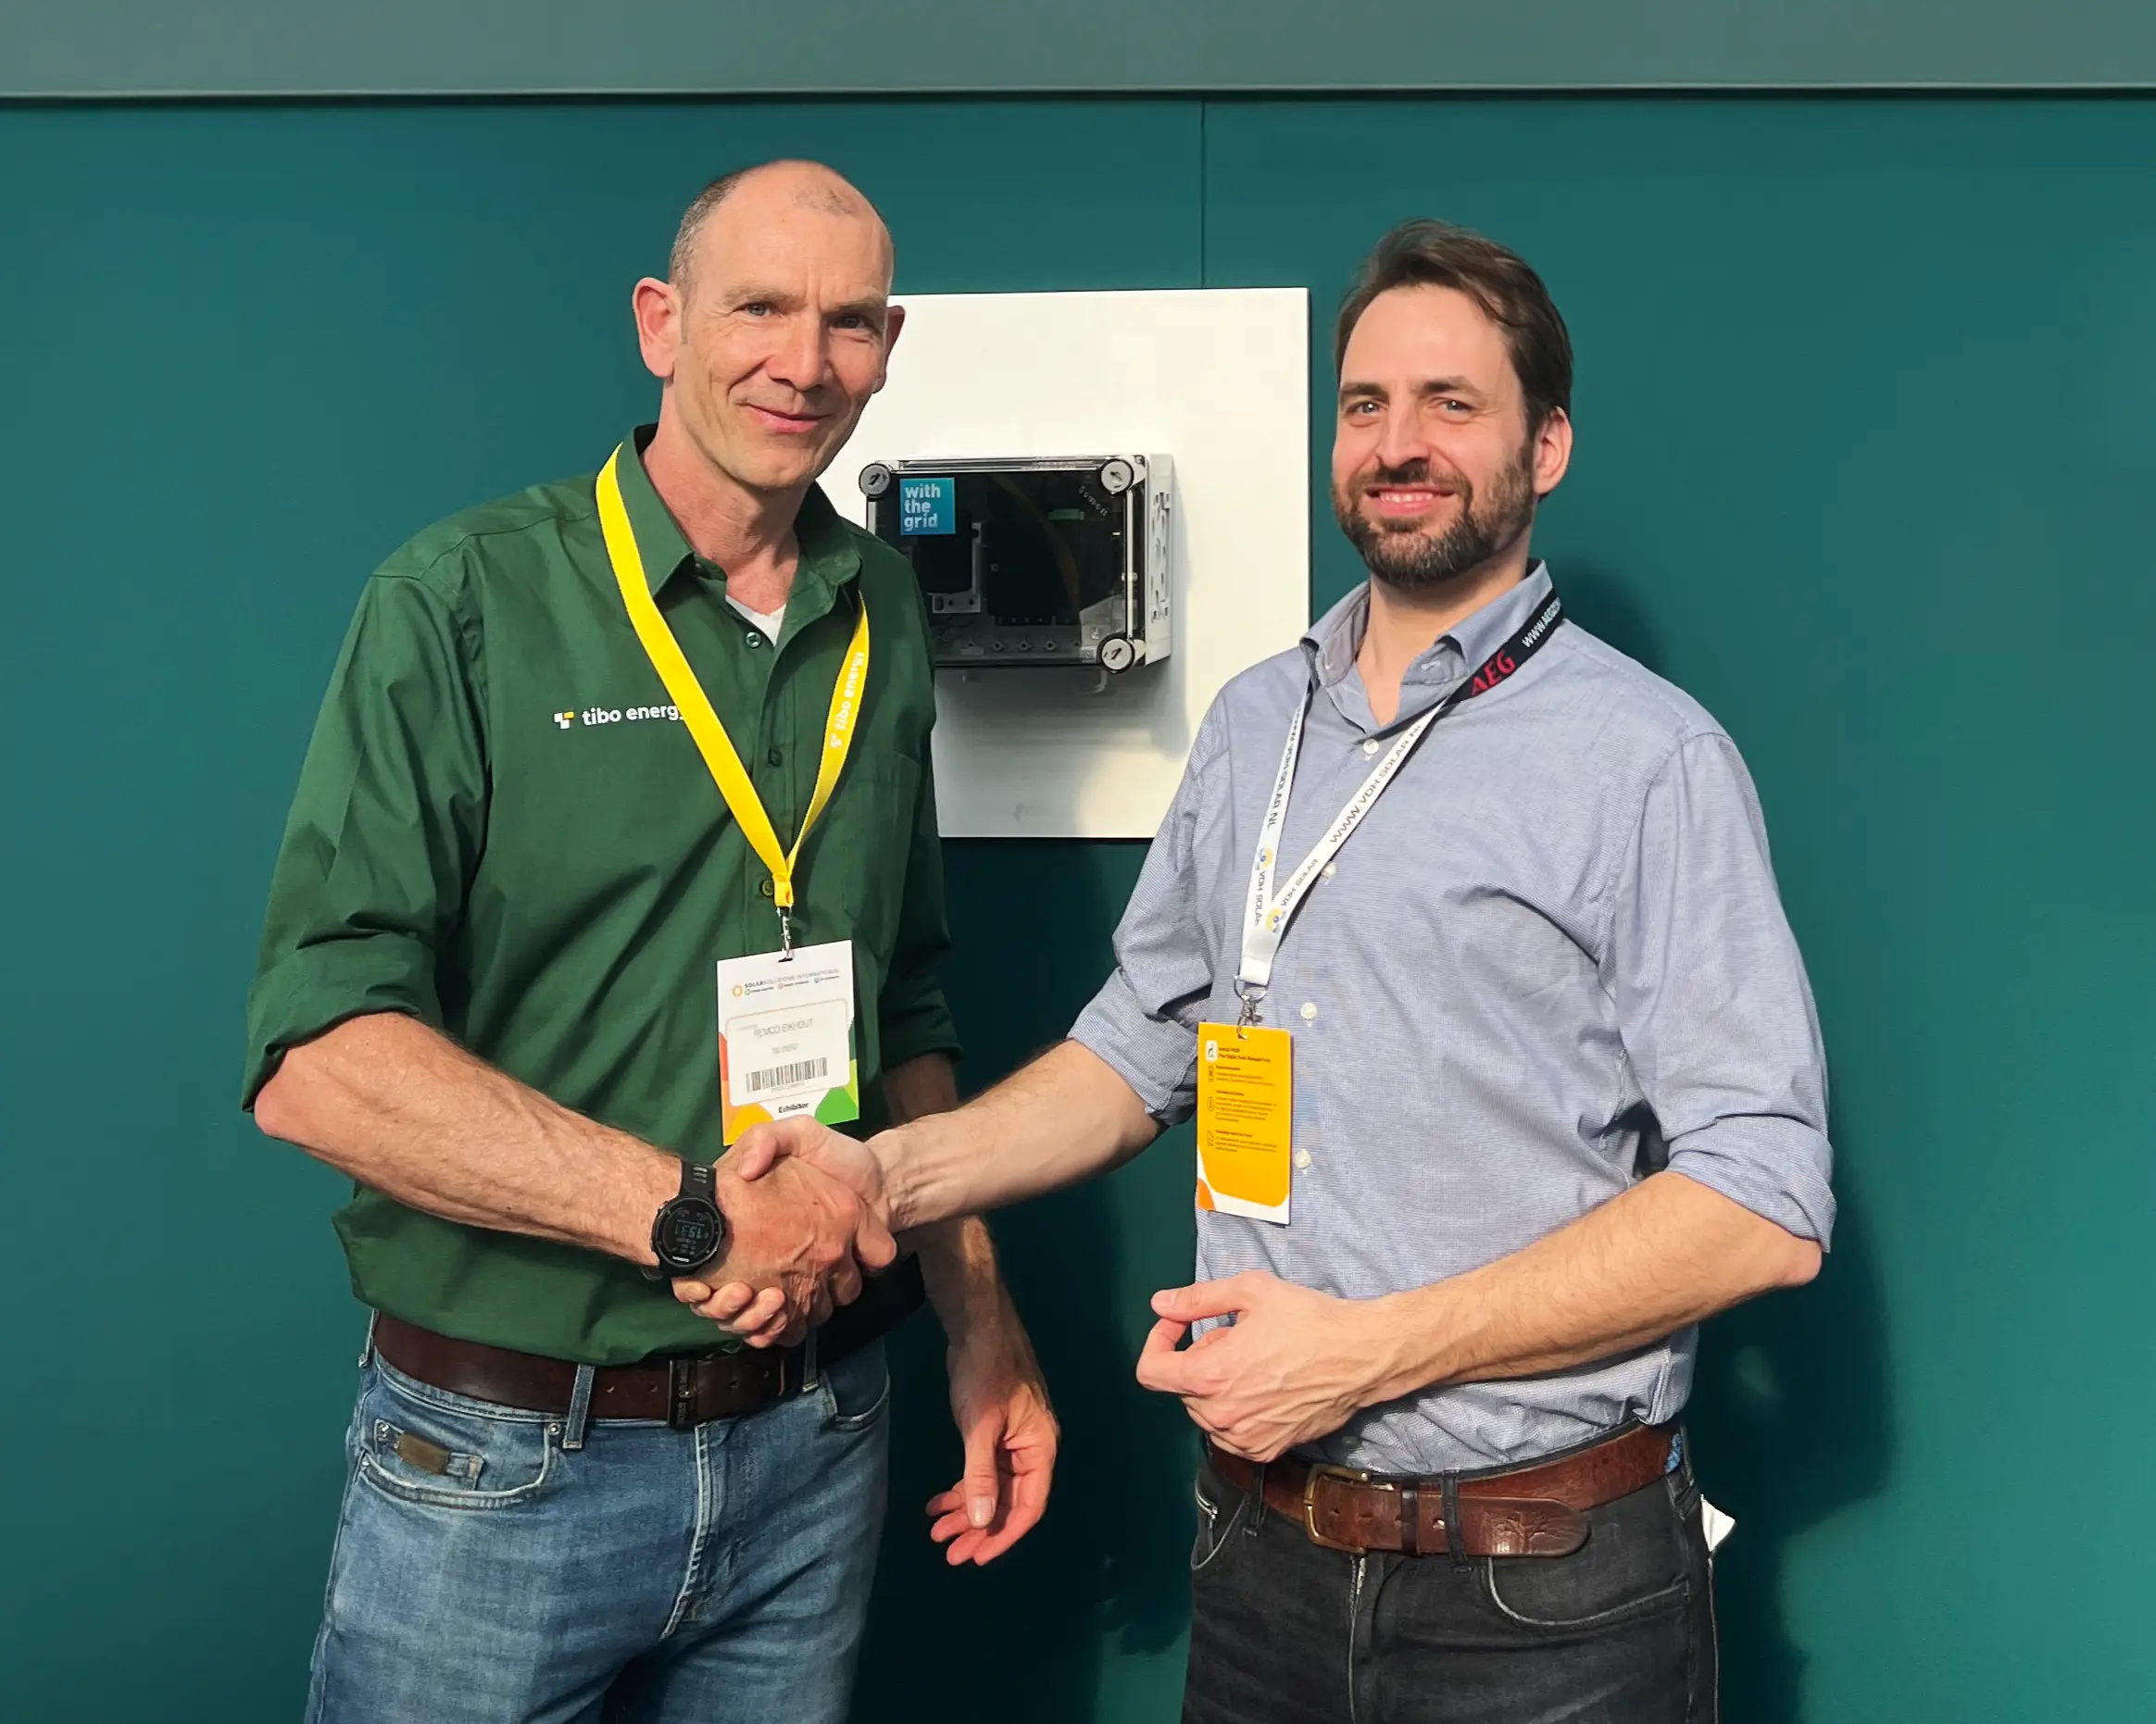 Picture of Paul Mignot (CEO of Withthegrid) and Remco Eikhout (CEO of Tibo Energy) shaking hands at the Solar Solutions fair after signing their partnership agreement